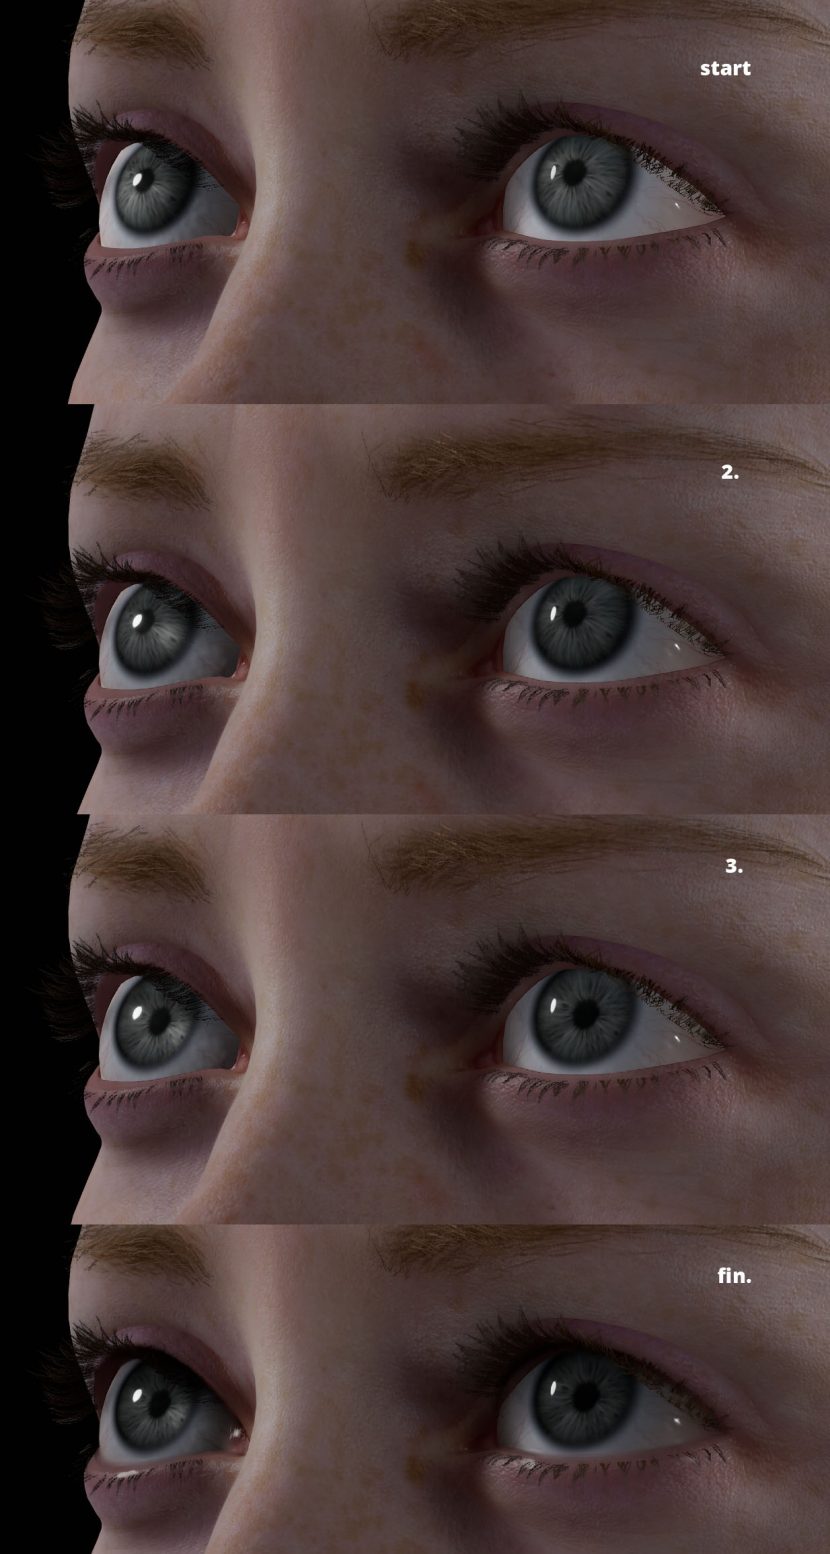 Four samples of the eye improvements each step added